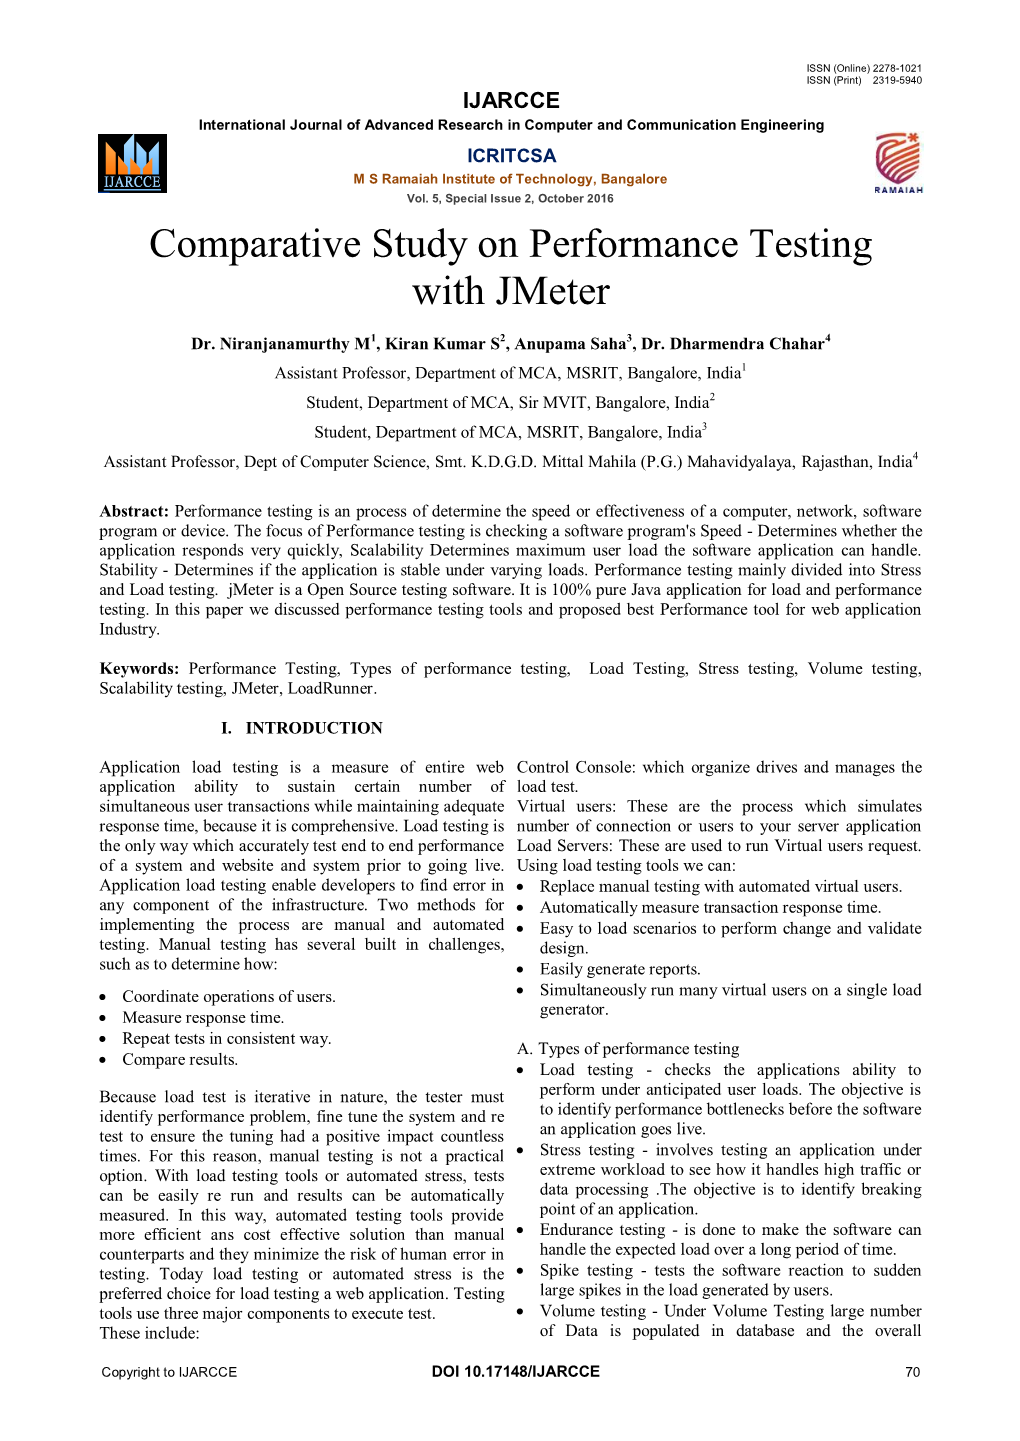 Comparative Study on Performance Testing with Jmeter